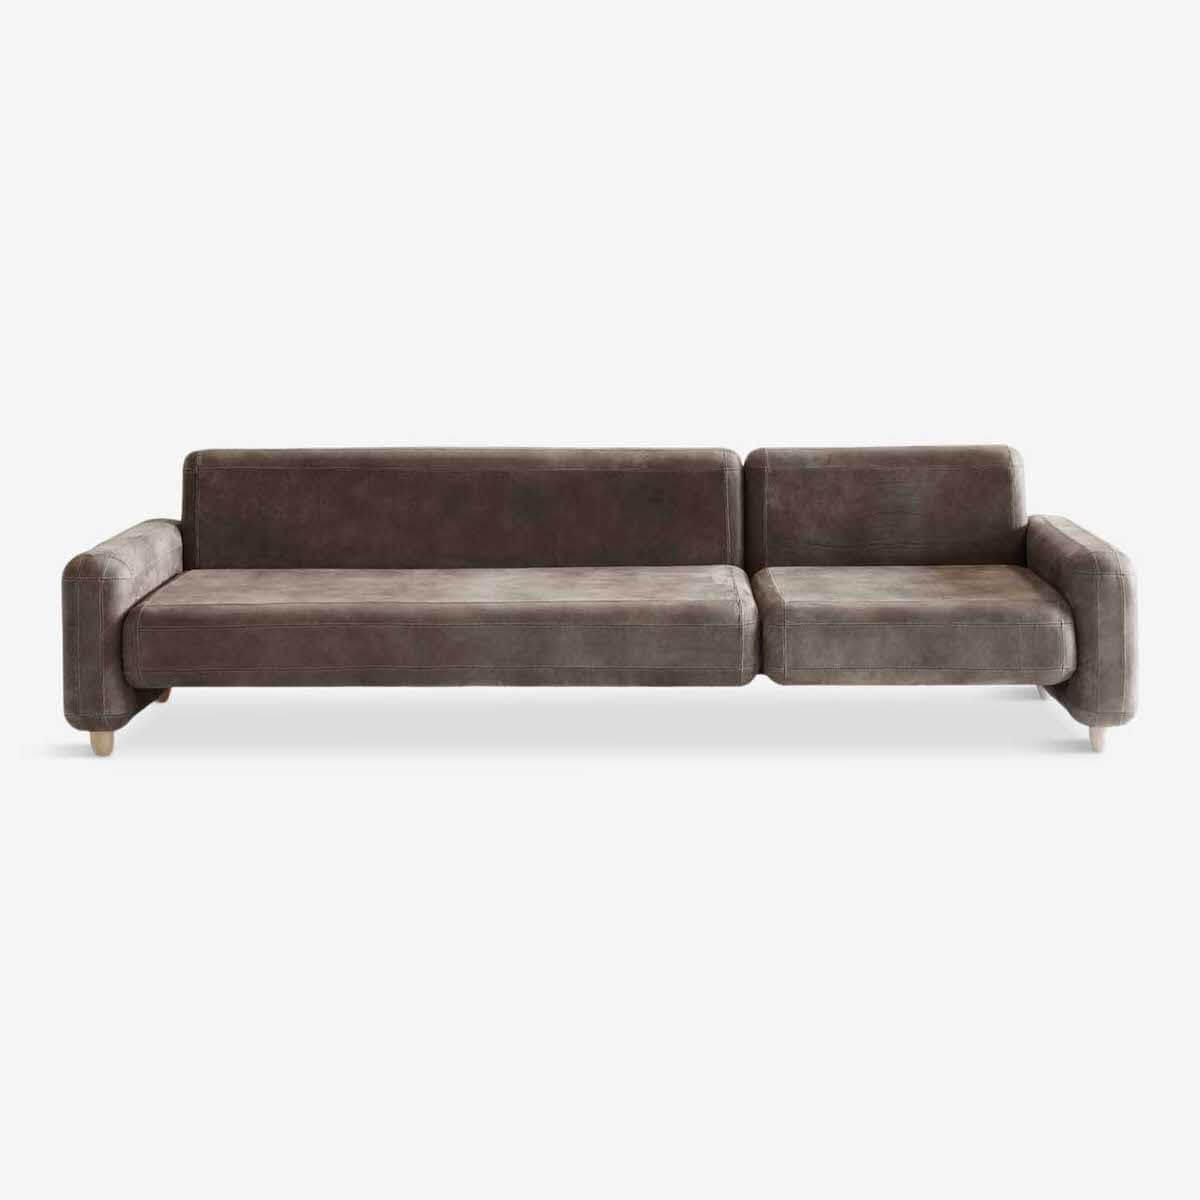 Traco 3 Seater Sofa in Grey Leather – Front View